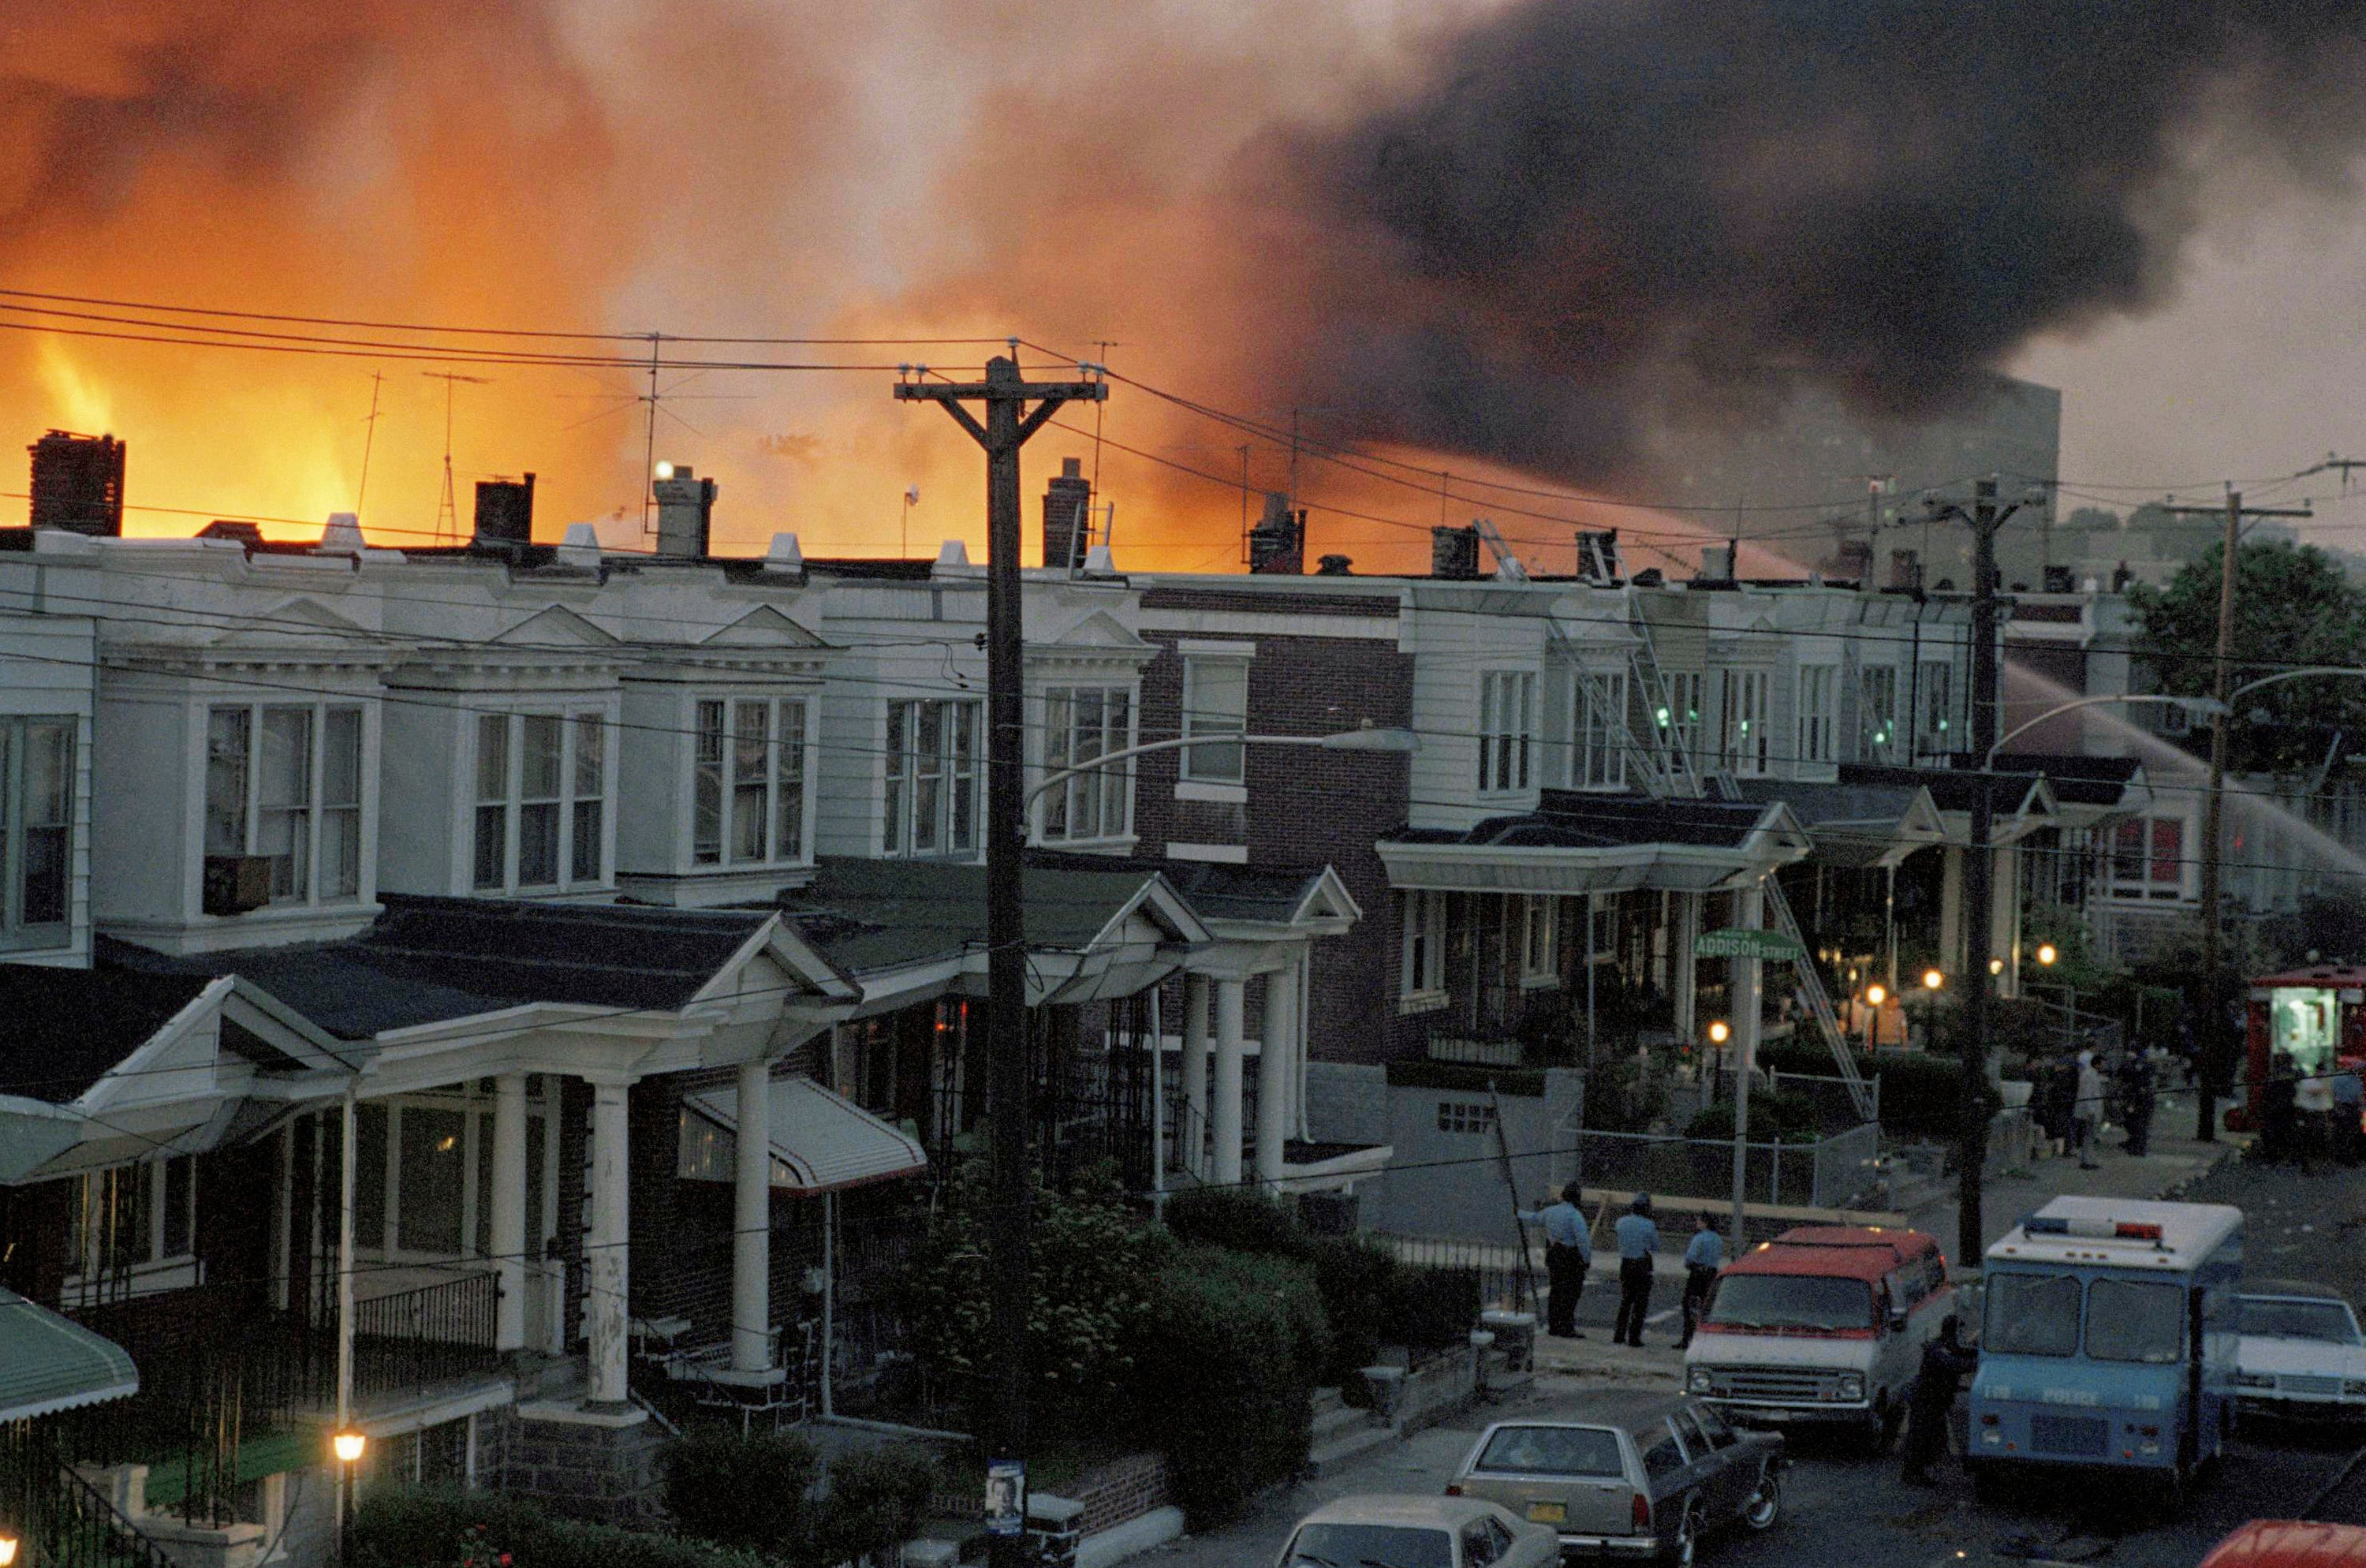 Scores of row houses in Philadelphia burned and 11 people were killed after police dropped two bombs on a home belonging to radical Black liberation organisation MOVE on 13 May, 1985.